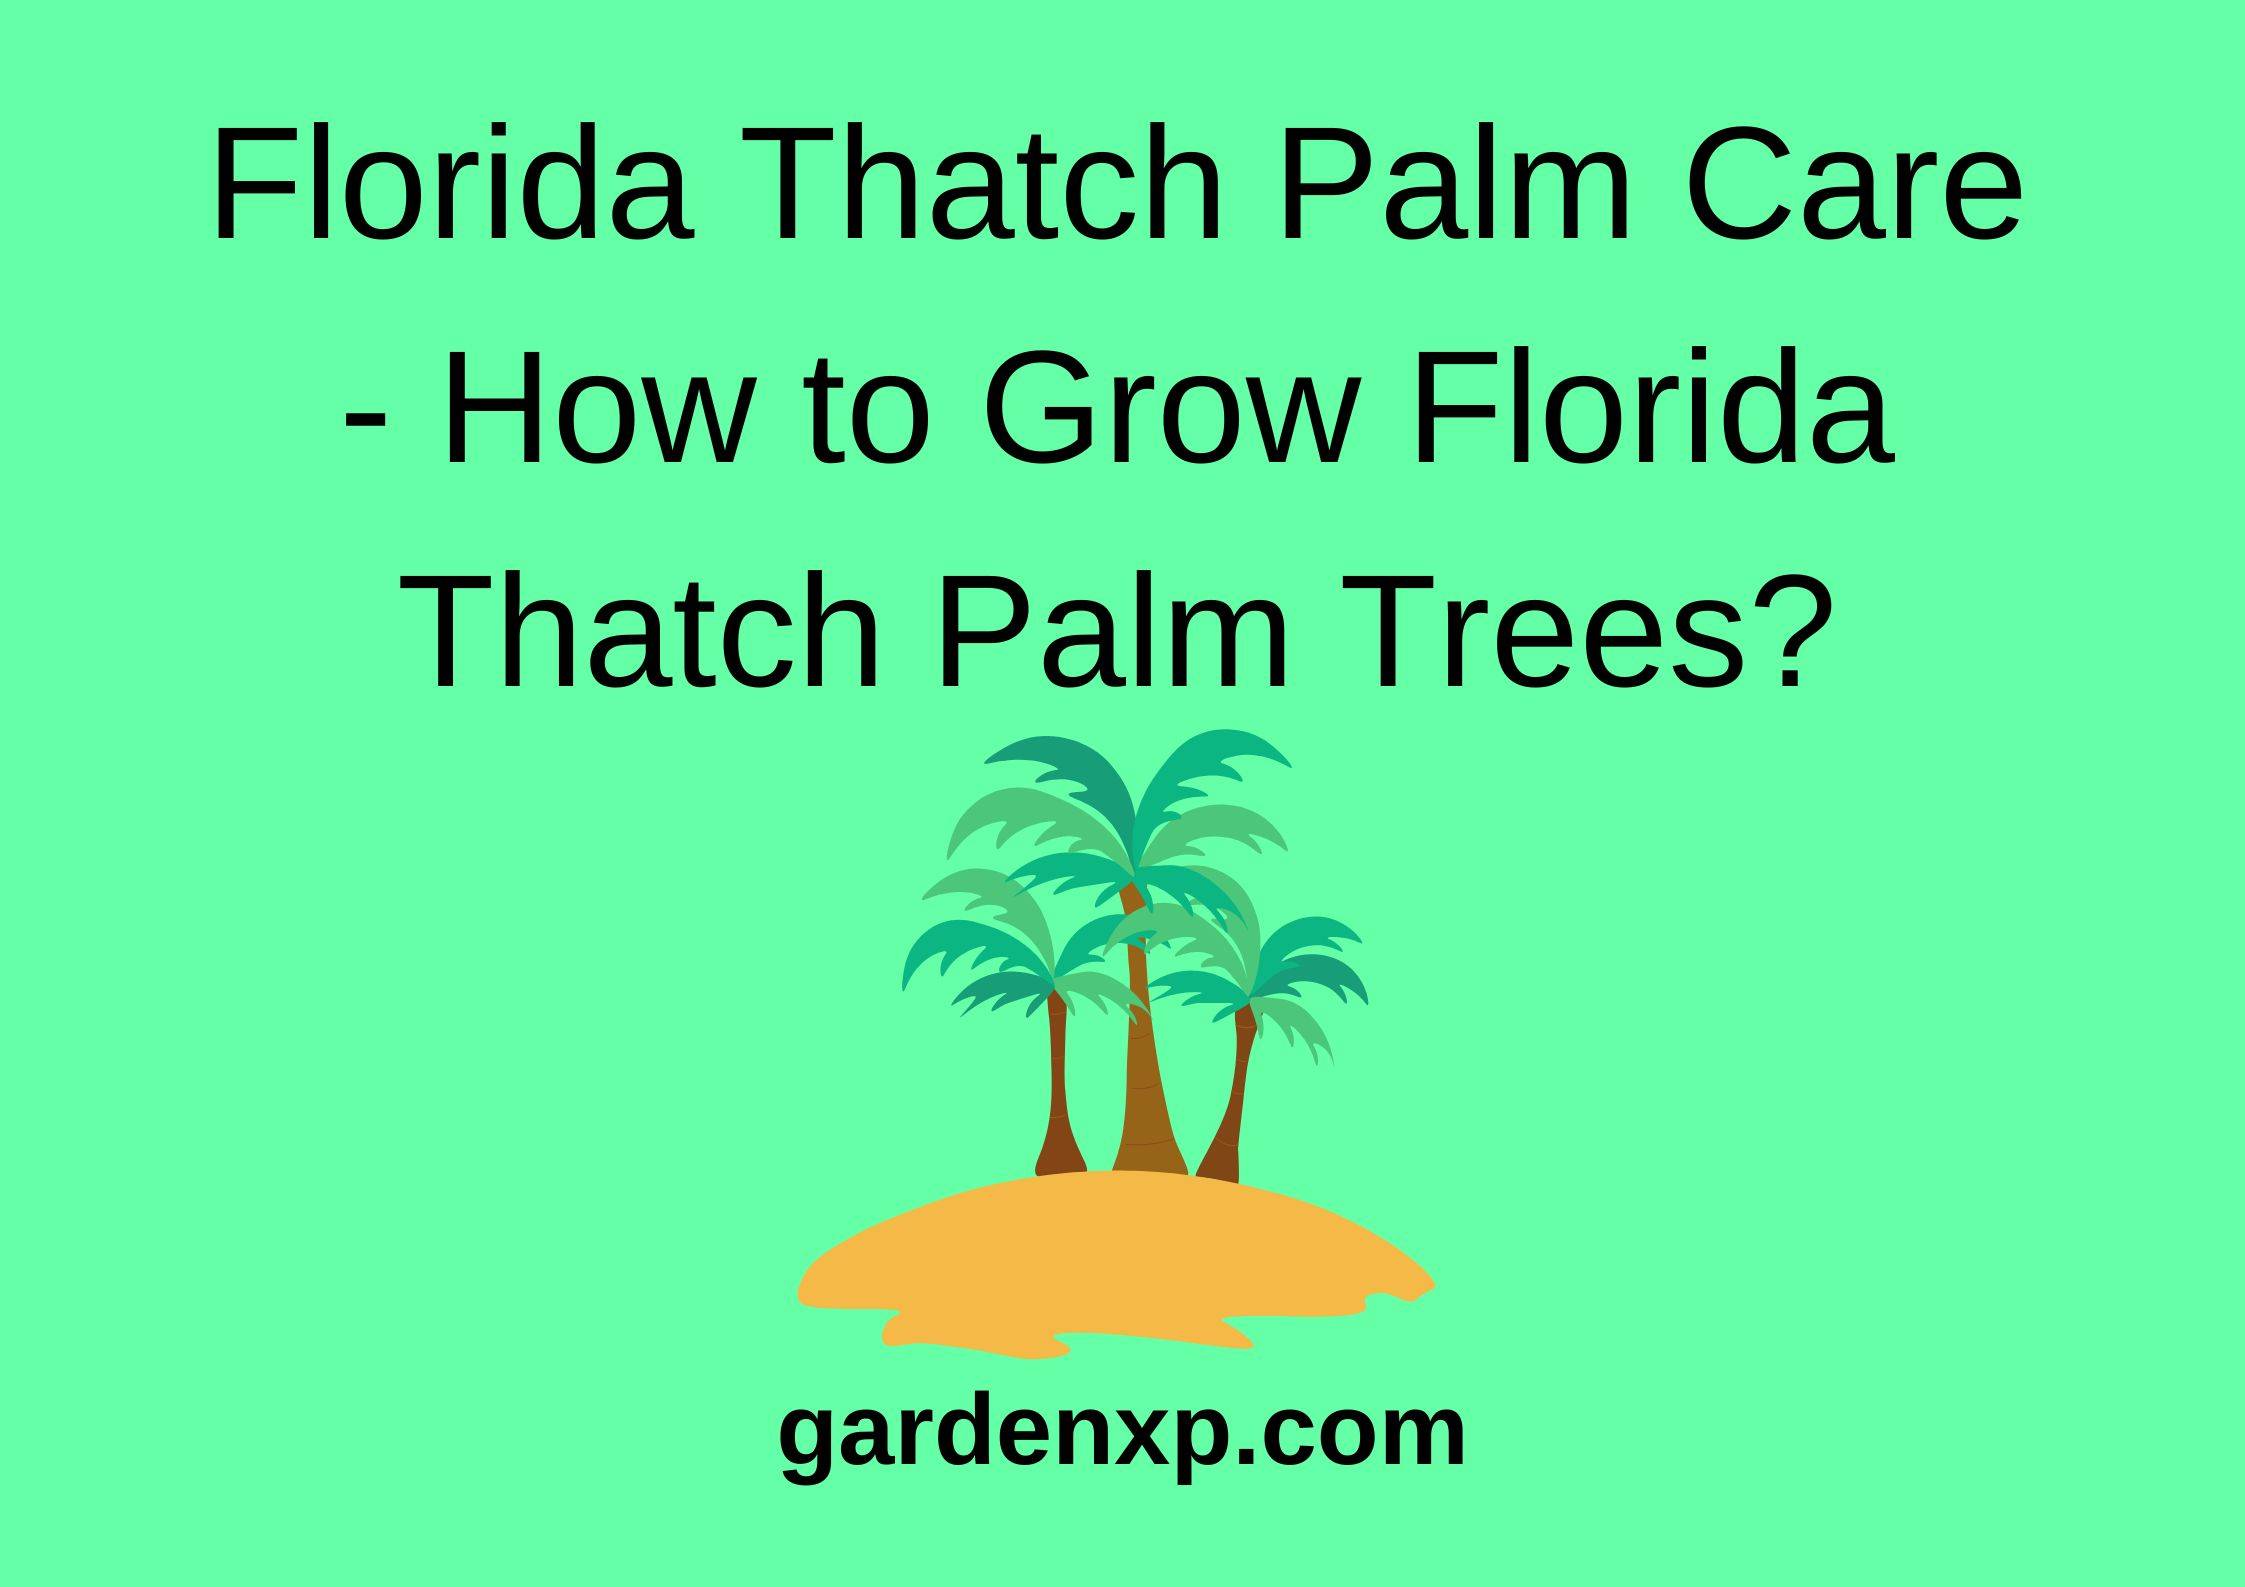 Florida Thatch Palm Care - How to Grow Florida Thatch Palm Trees?